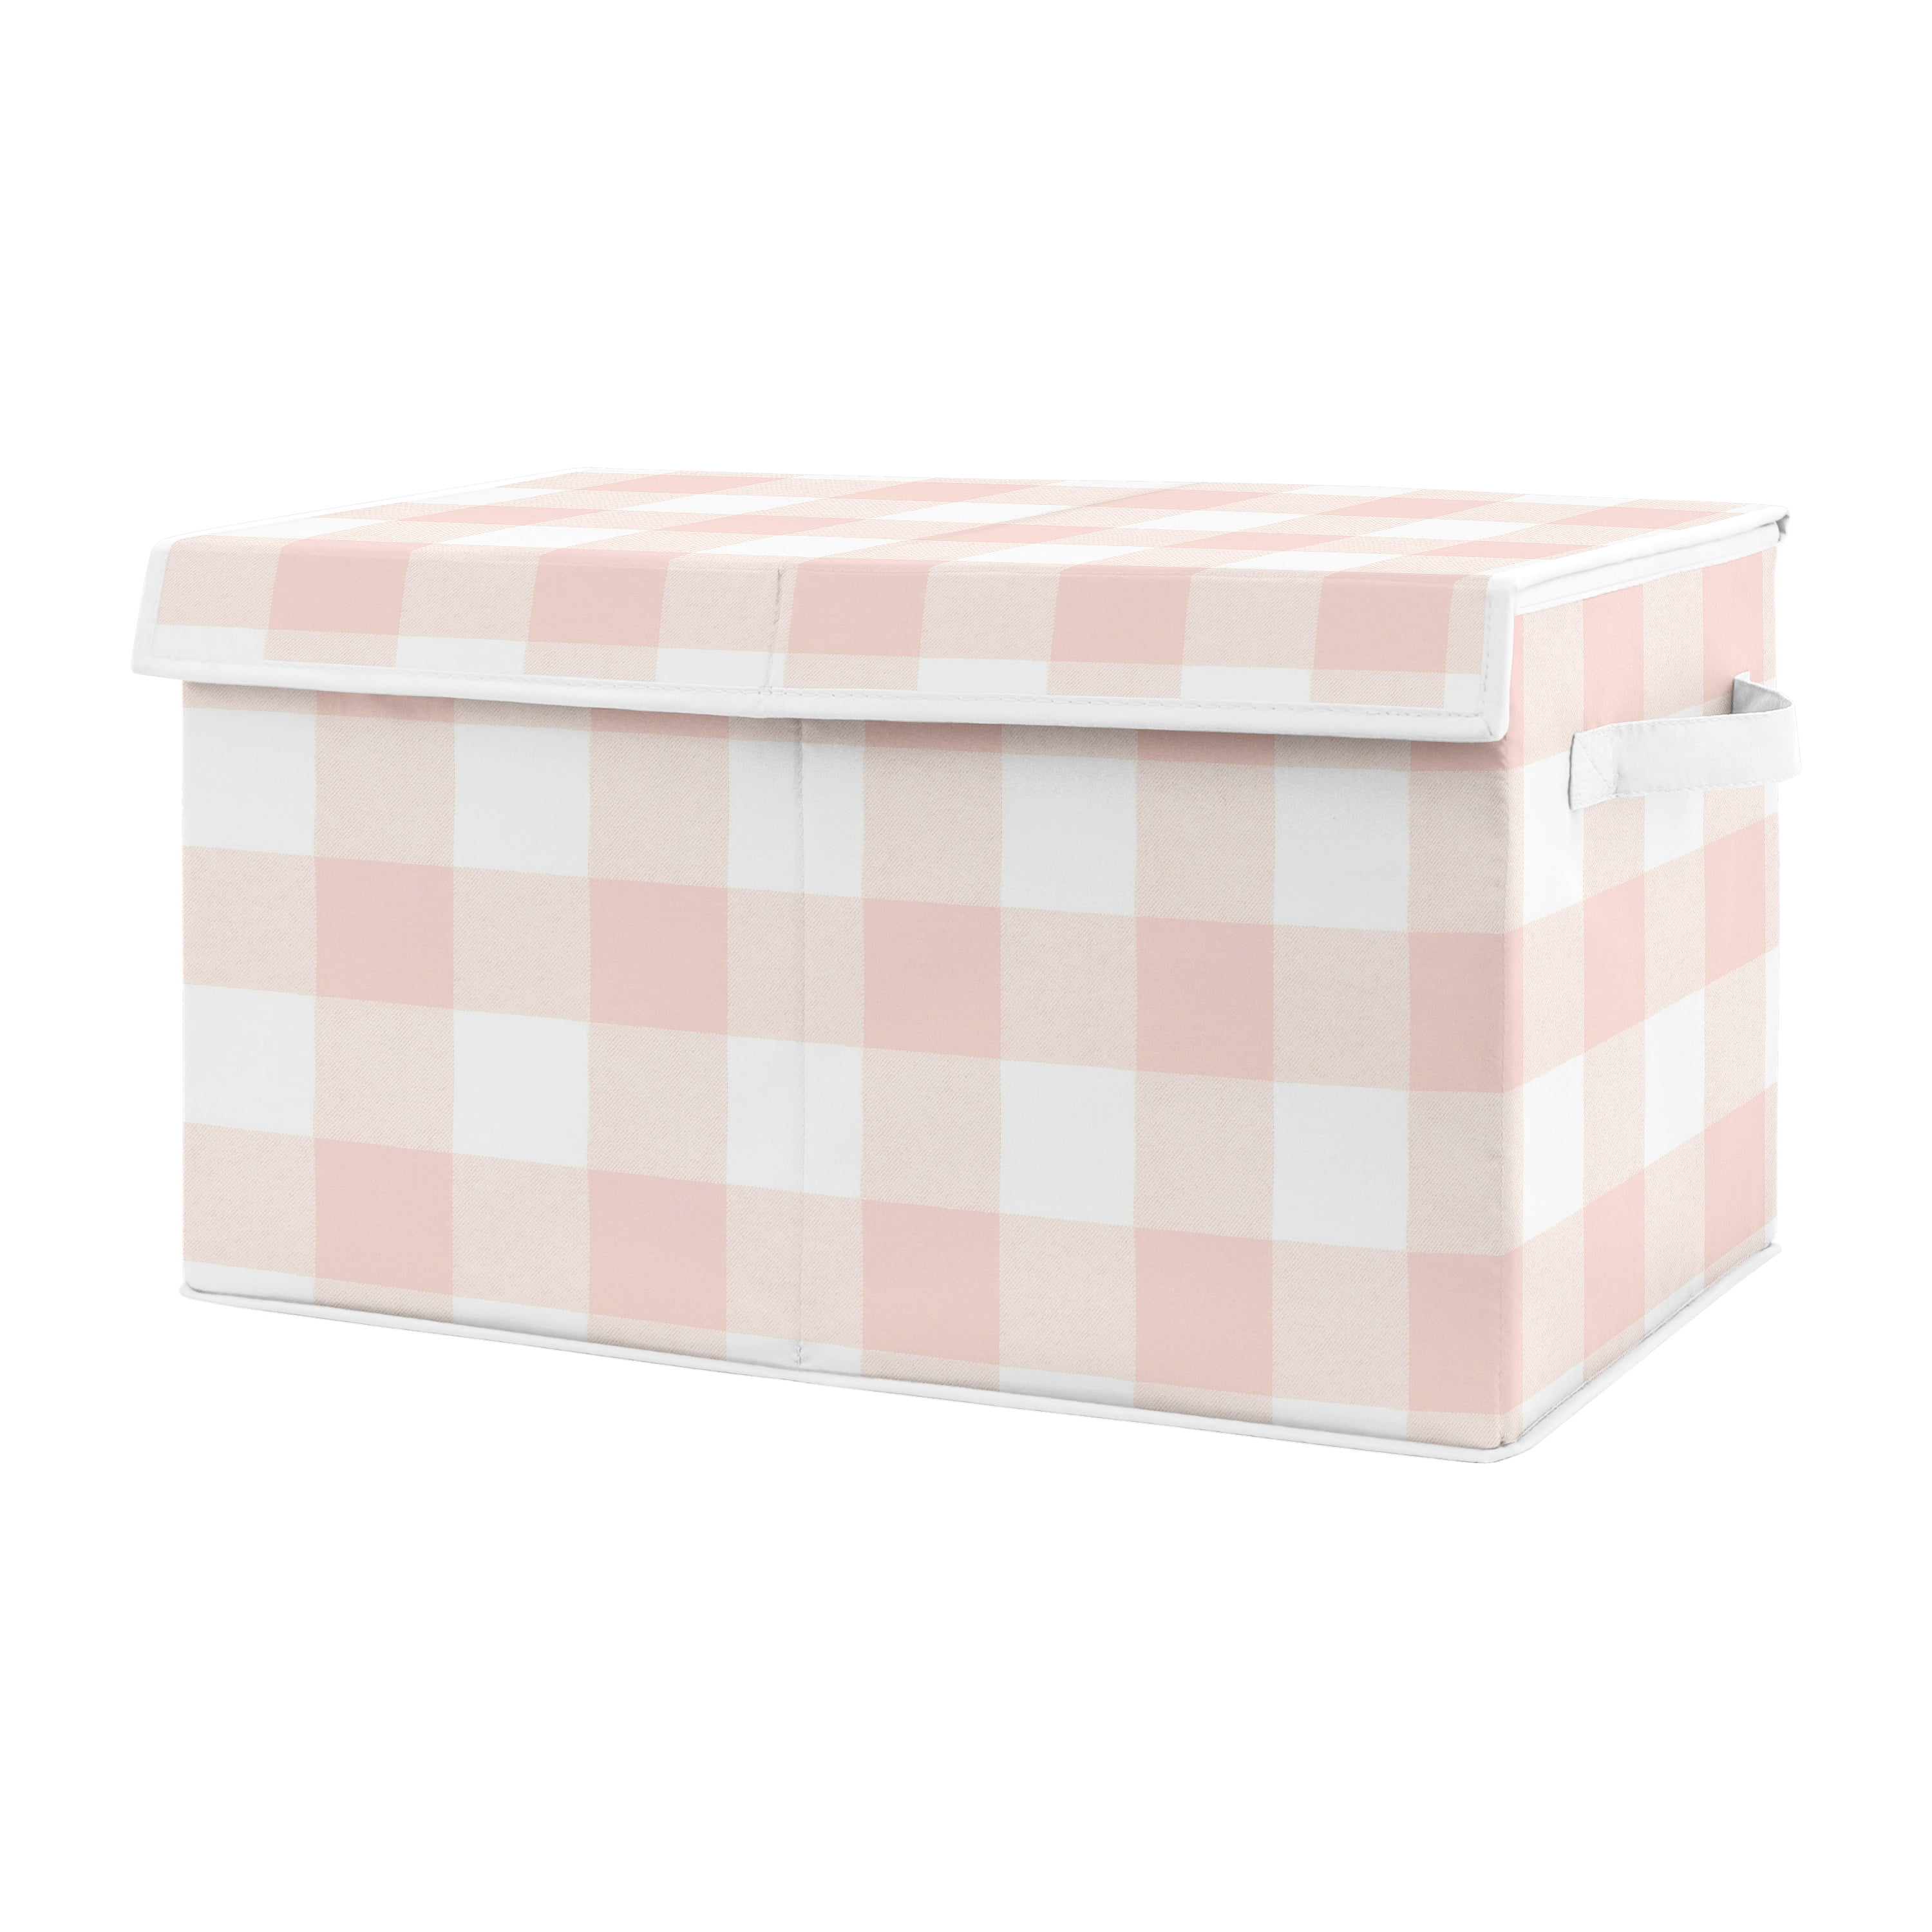 Sweet Jojo Designs Pink Buffalo Plaid Check Baby Kid Clothes Laundry Hamper Blush and White Shabby Chic Woodland Rustic Country Farmhouse 